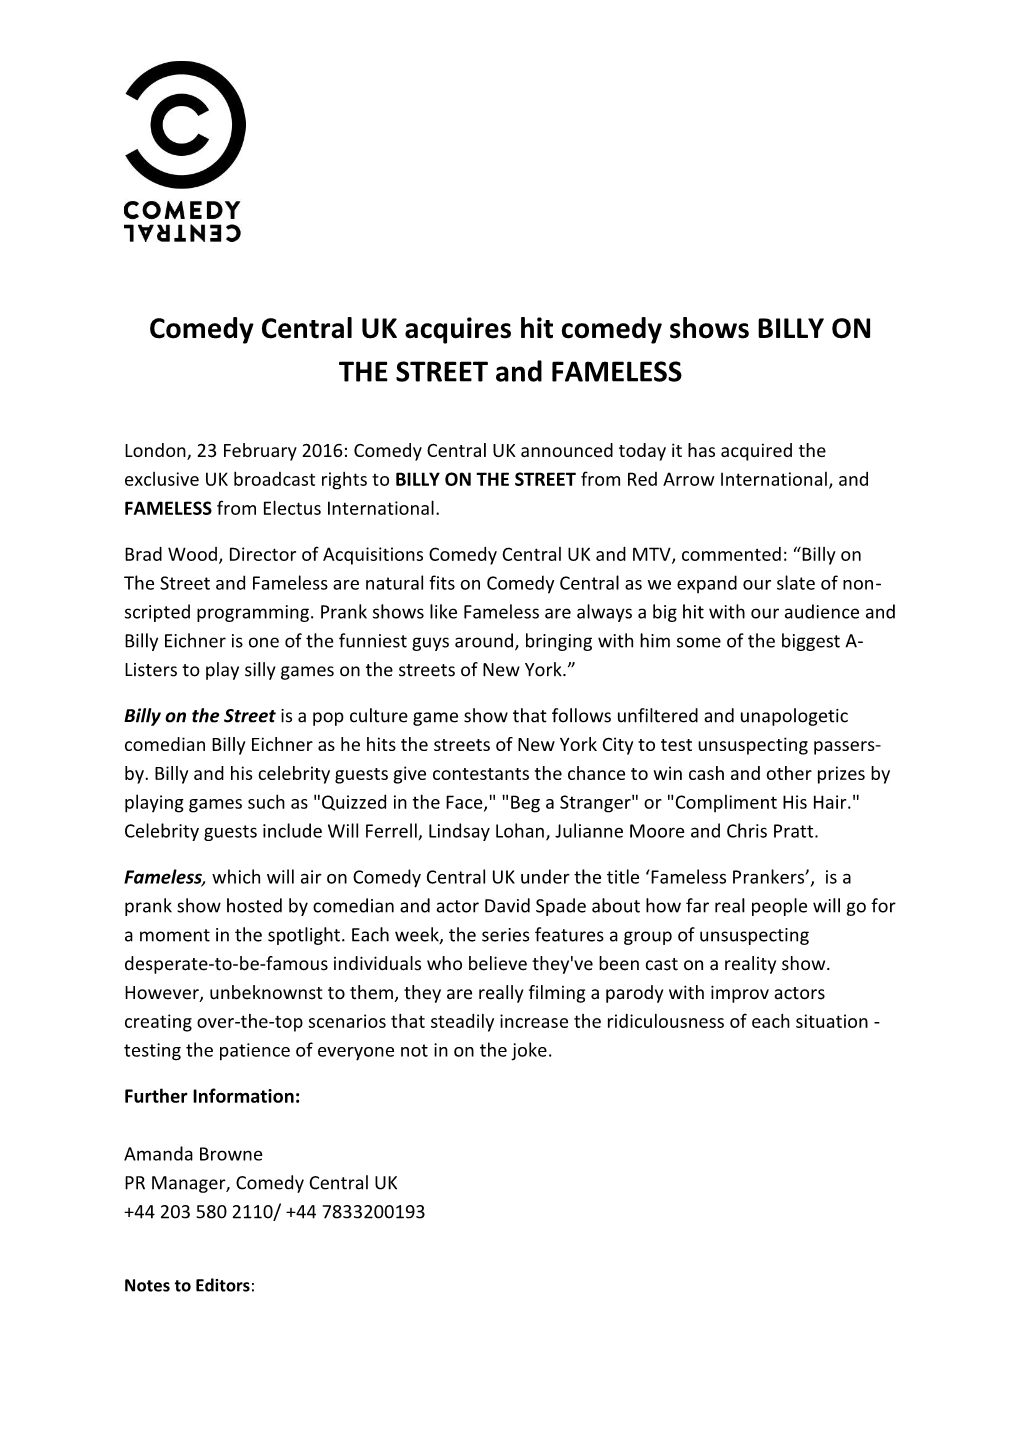 Comedy Central UK Acquires Hit Comedy Shows BILLY on the STREET and FAMELESS